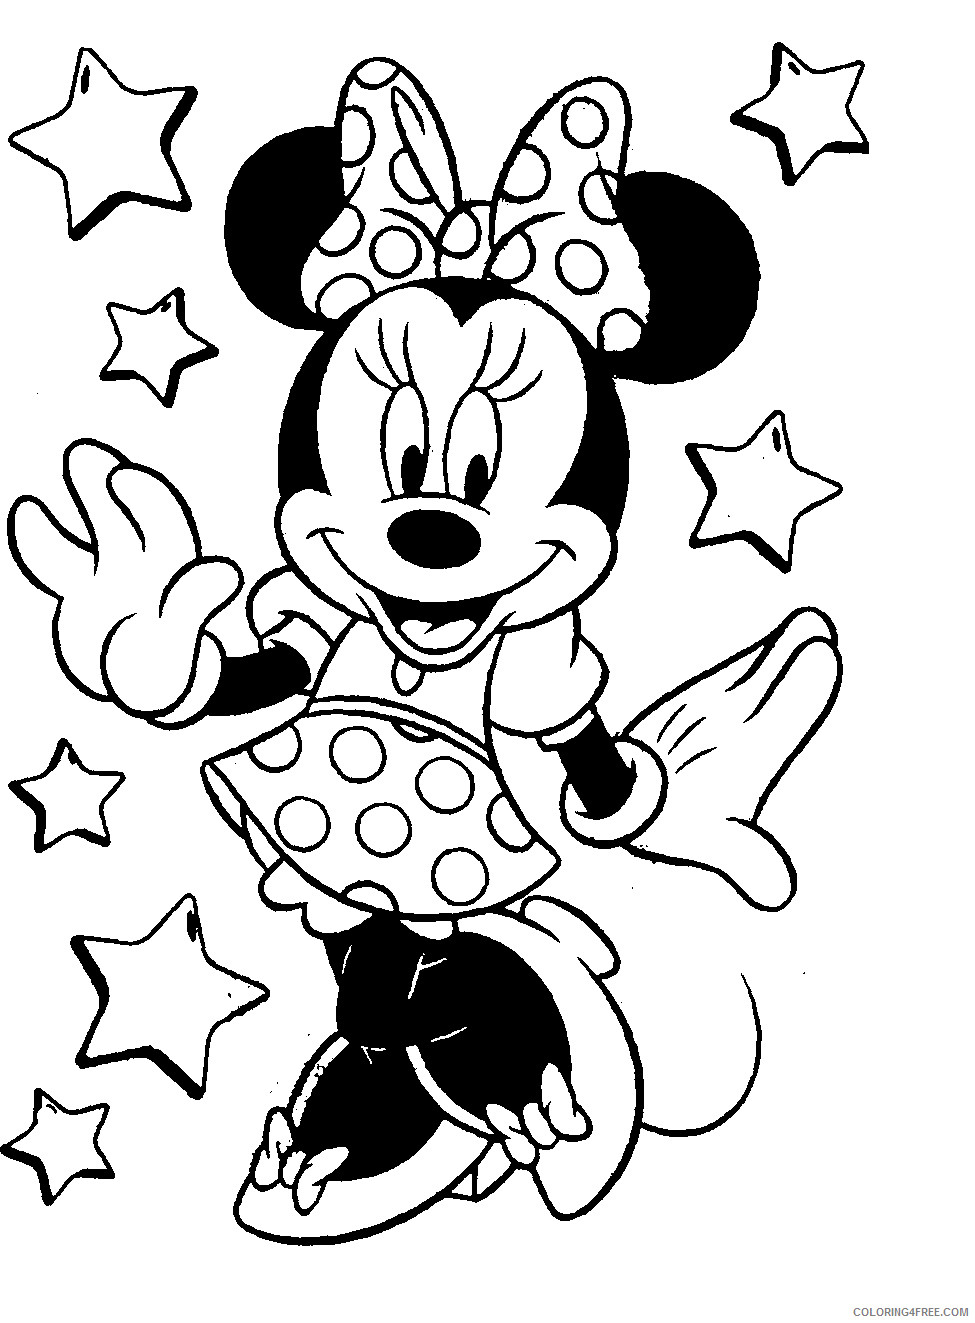 Minnie Mouse Coloring Pages Cartoons Minnie Mouse 2 Printable 2020 4311 Coloring4free